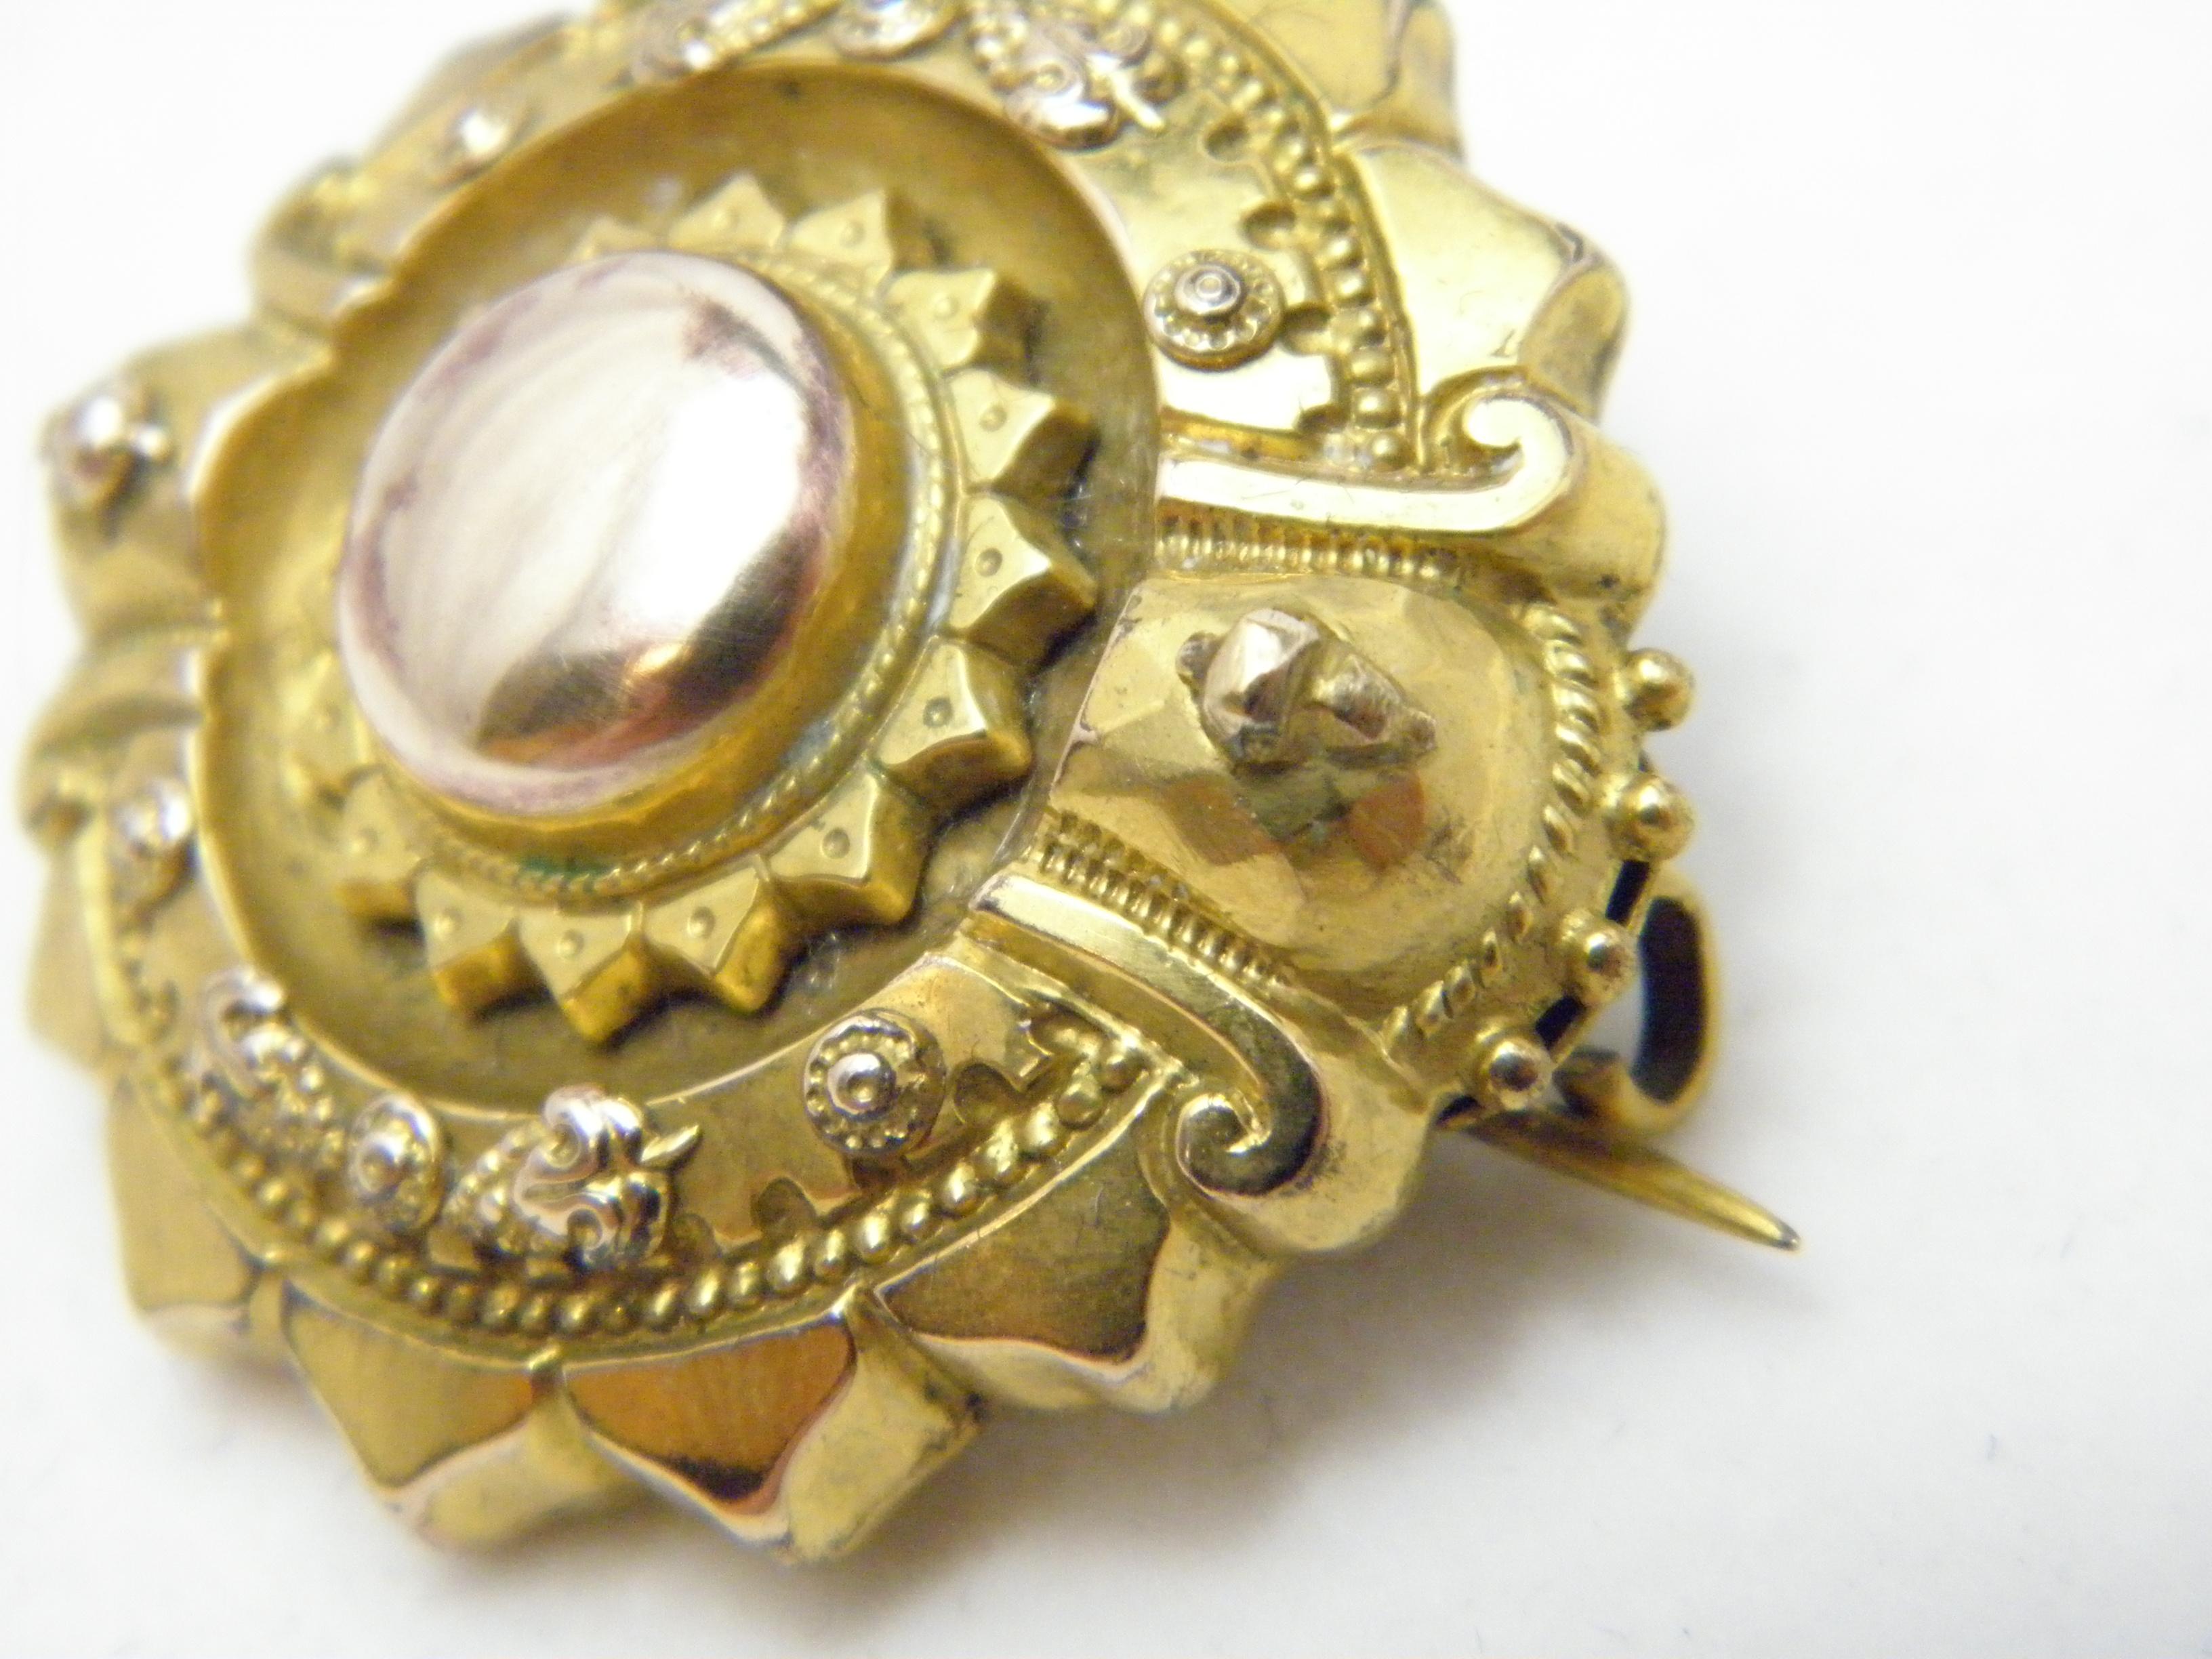 Antique 15ct Gold Locket Photo Target Brooch Pin c1810 Heavy 10g 625 Purity In Good Condition For Sale In Camelford, GB